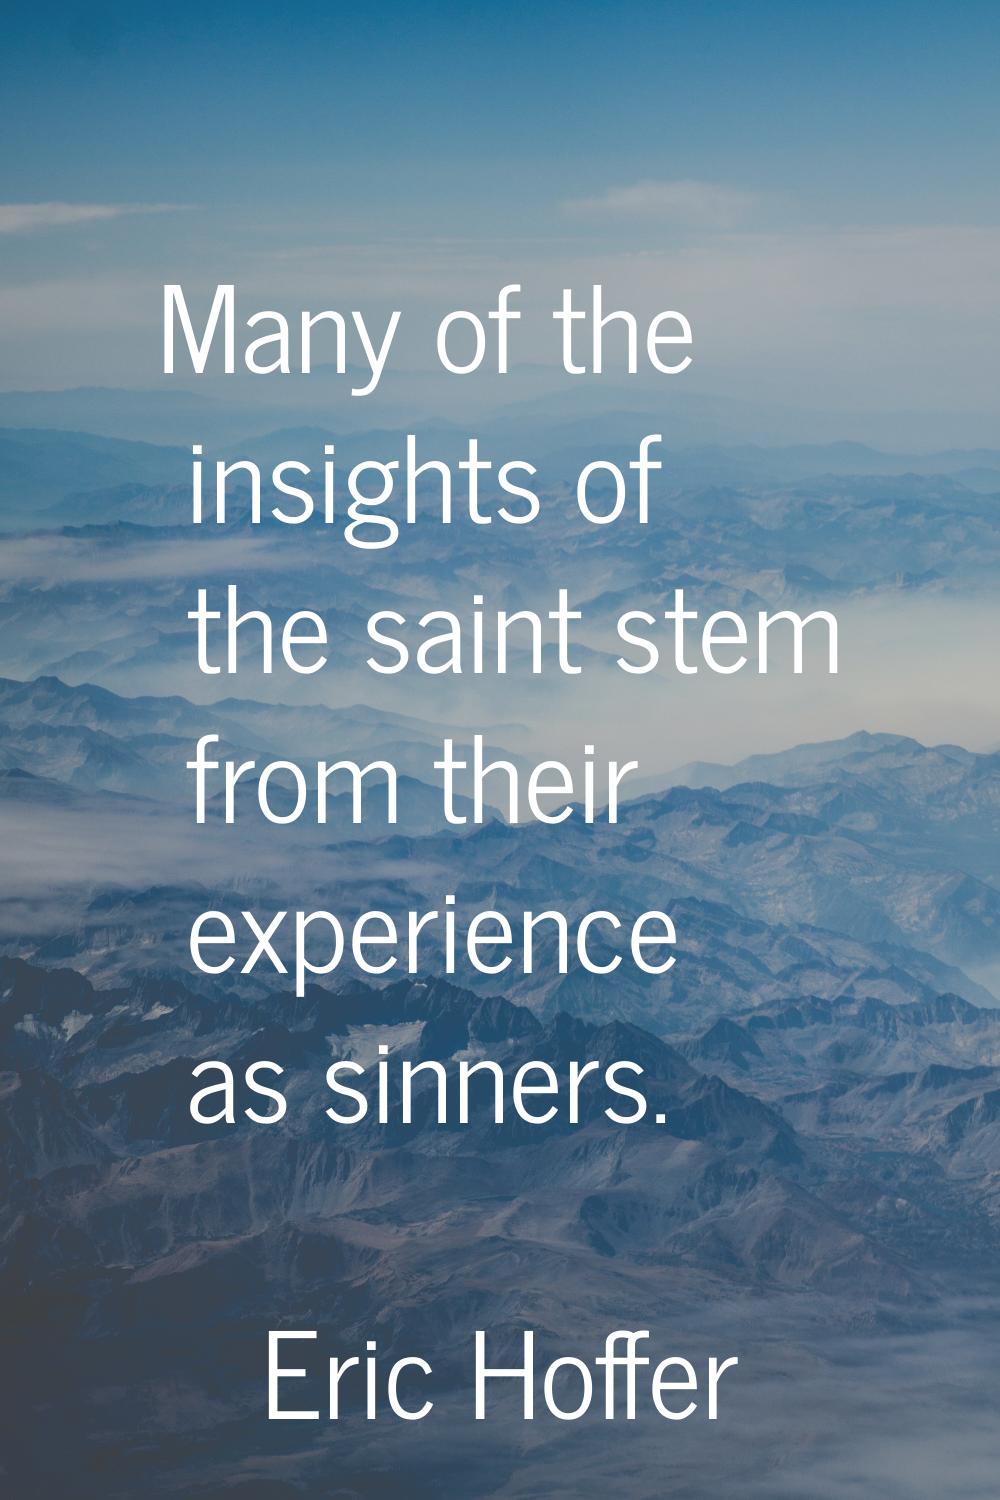 Many of the insights of the saint stem from their experience as sinners.